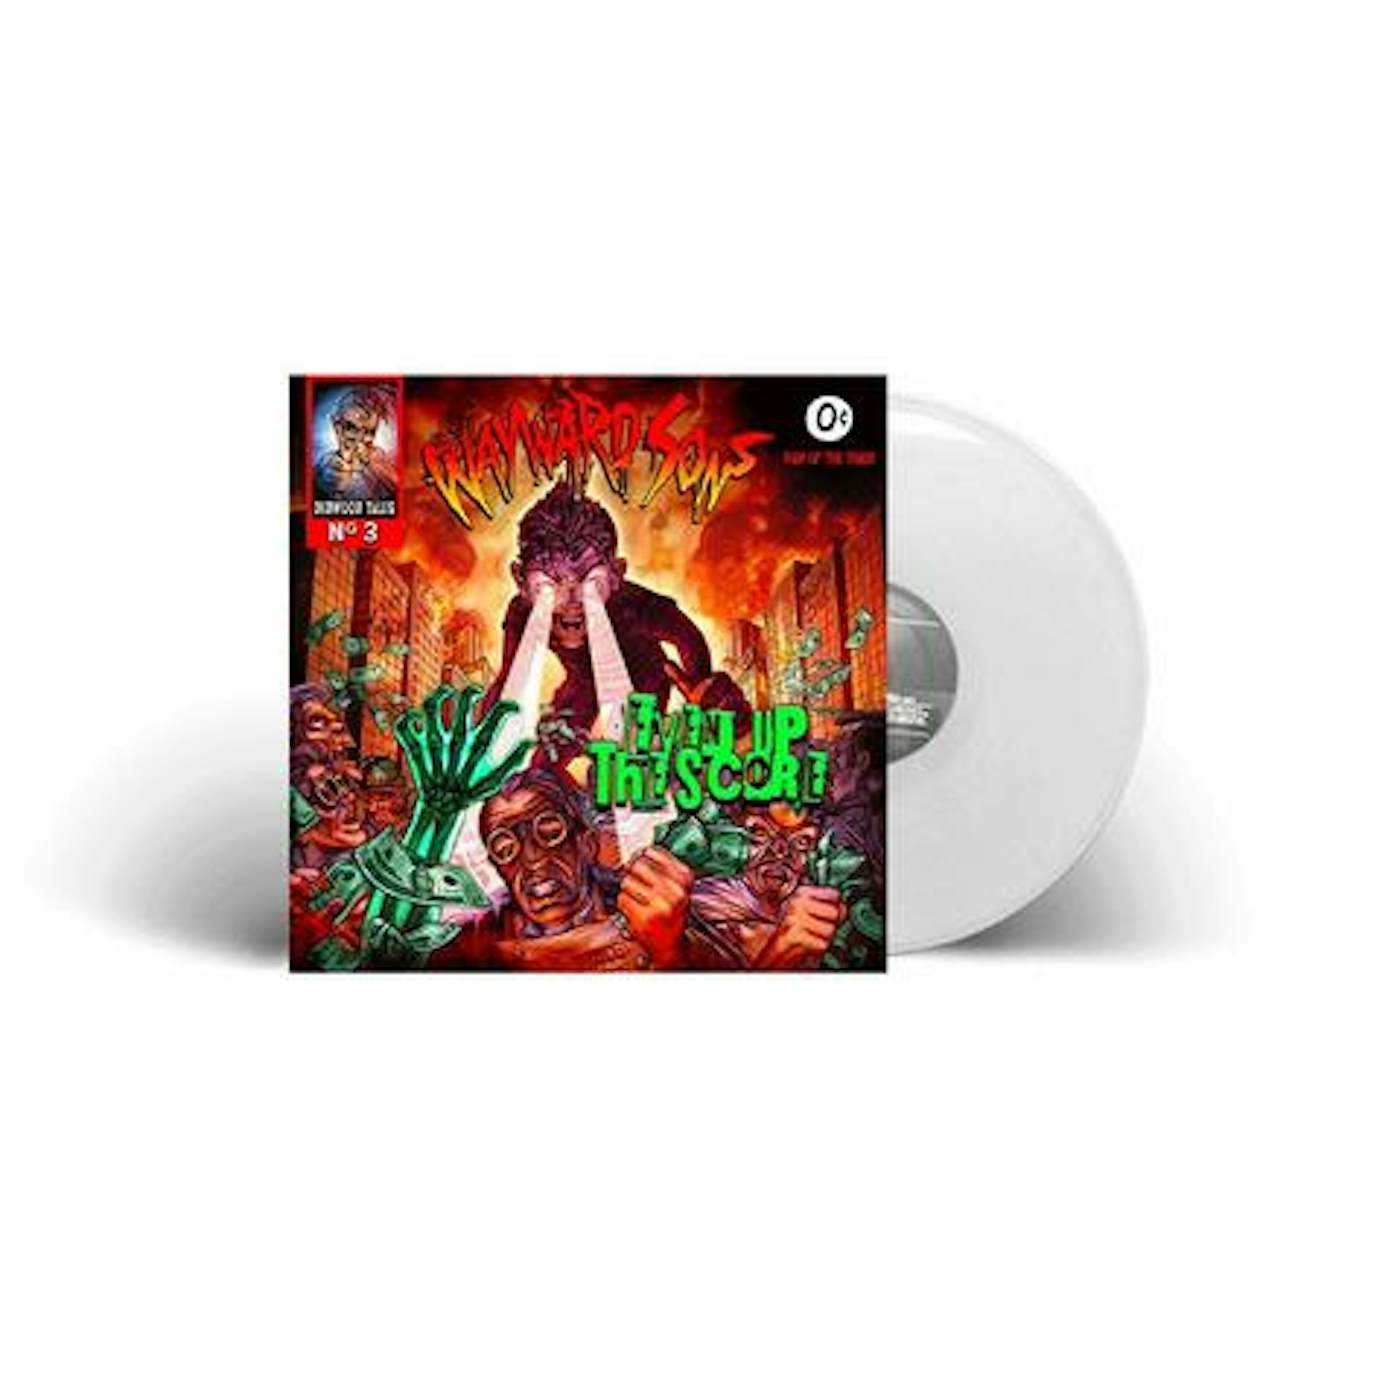 Wayward Sons EVEN UP THE SCORE (WHITE VINYL/LIMITED) Vinyl Record